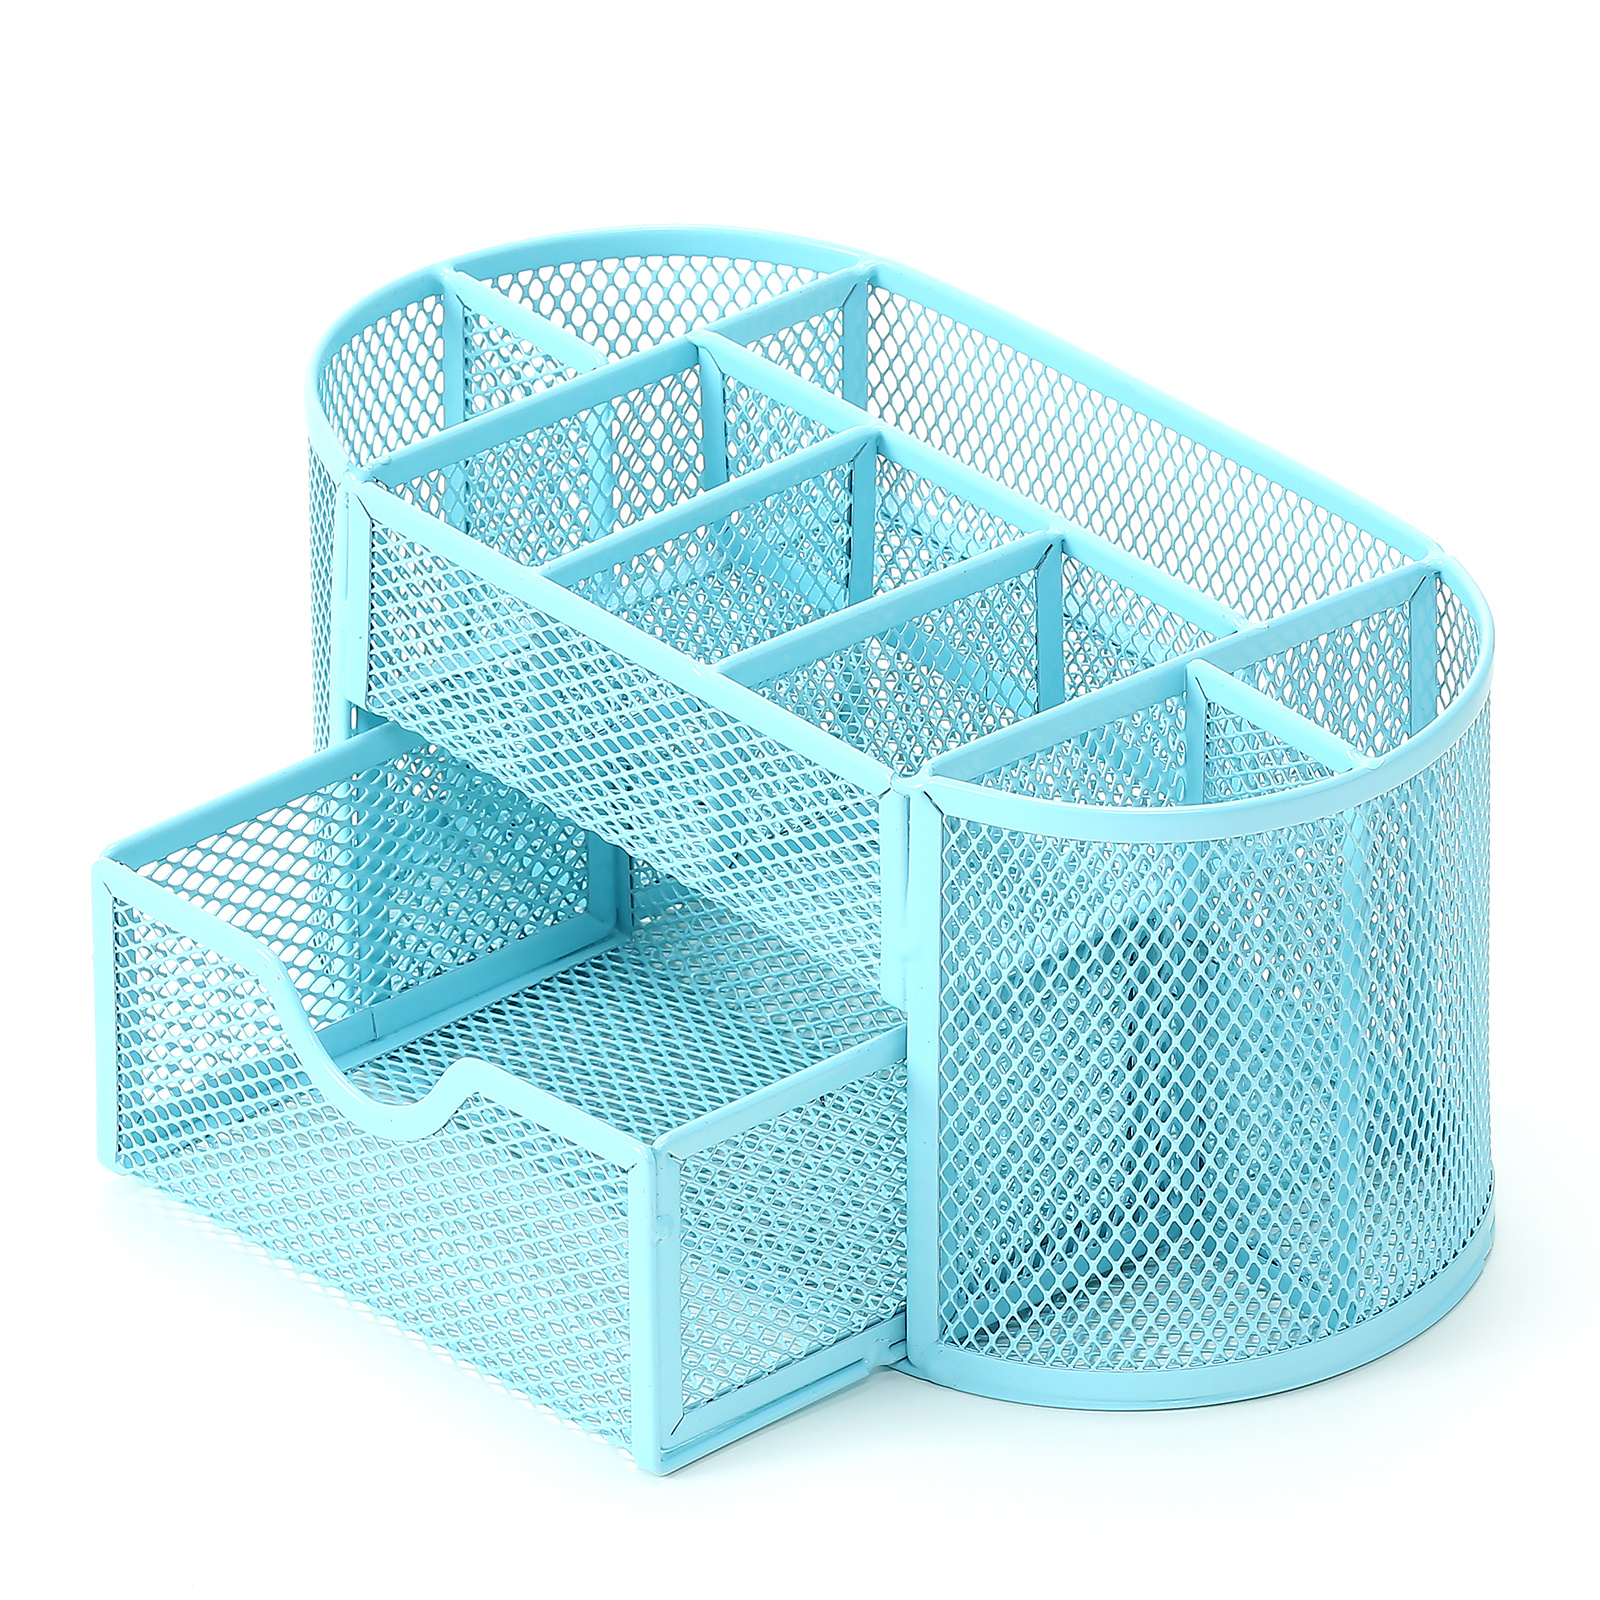 Lechay Mesh Pen Holder, Desk Organizer for Desk Pencil Holder with 8 Compartments and 1 Drawer Desk Supplies for Office Home 1 PC